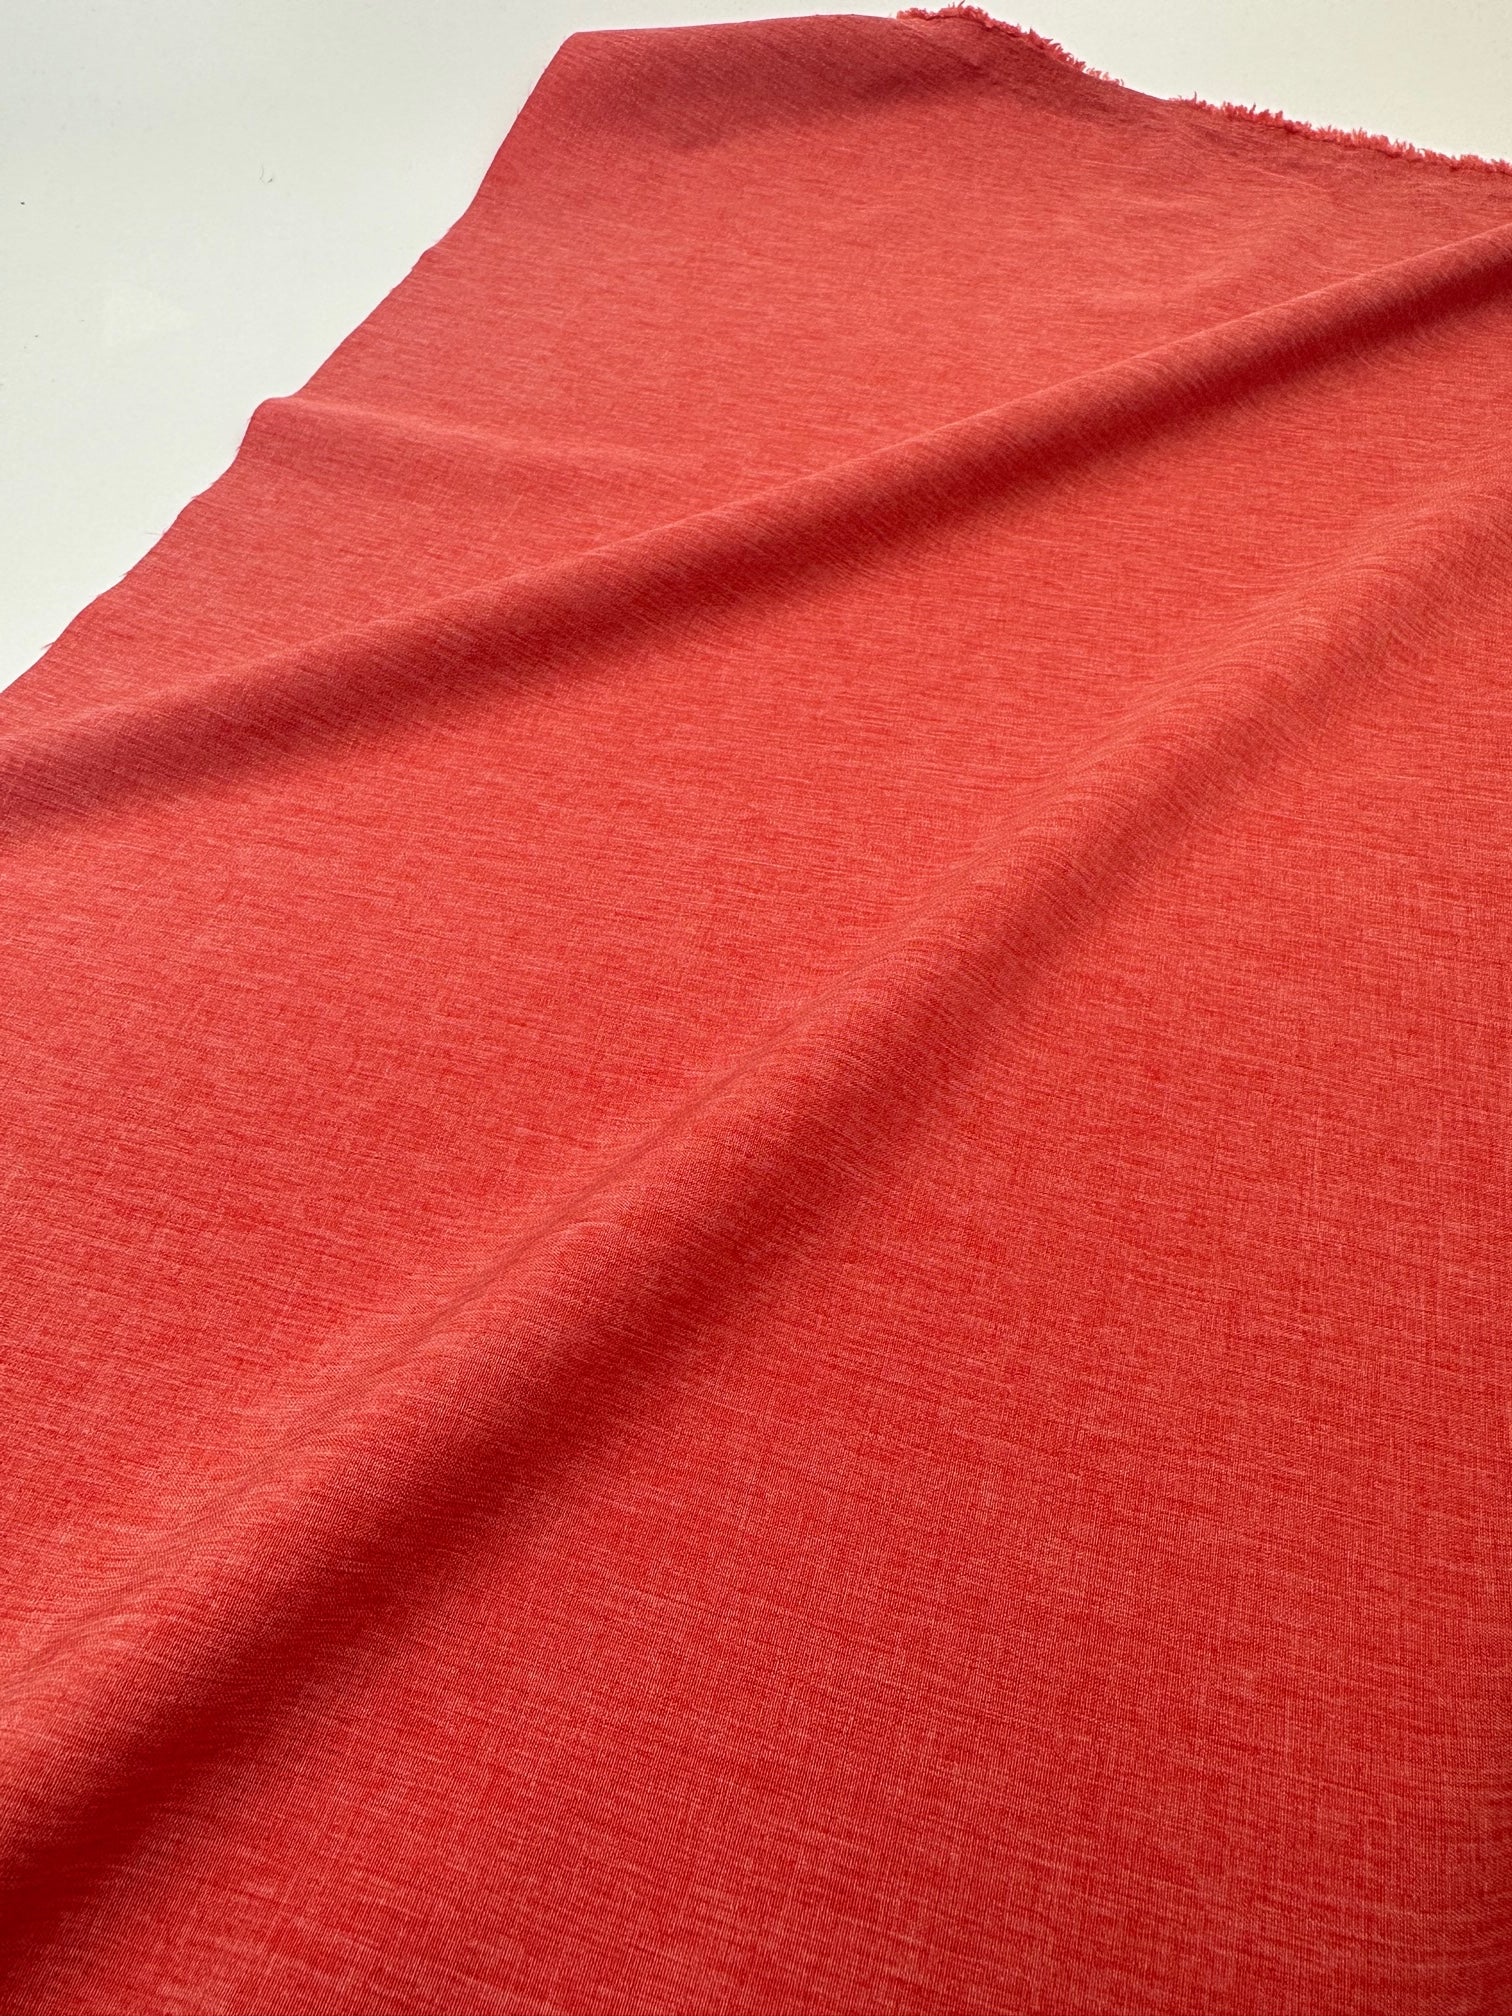 Stretch Woven - Red Linen Look